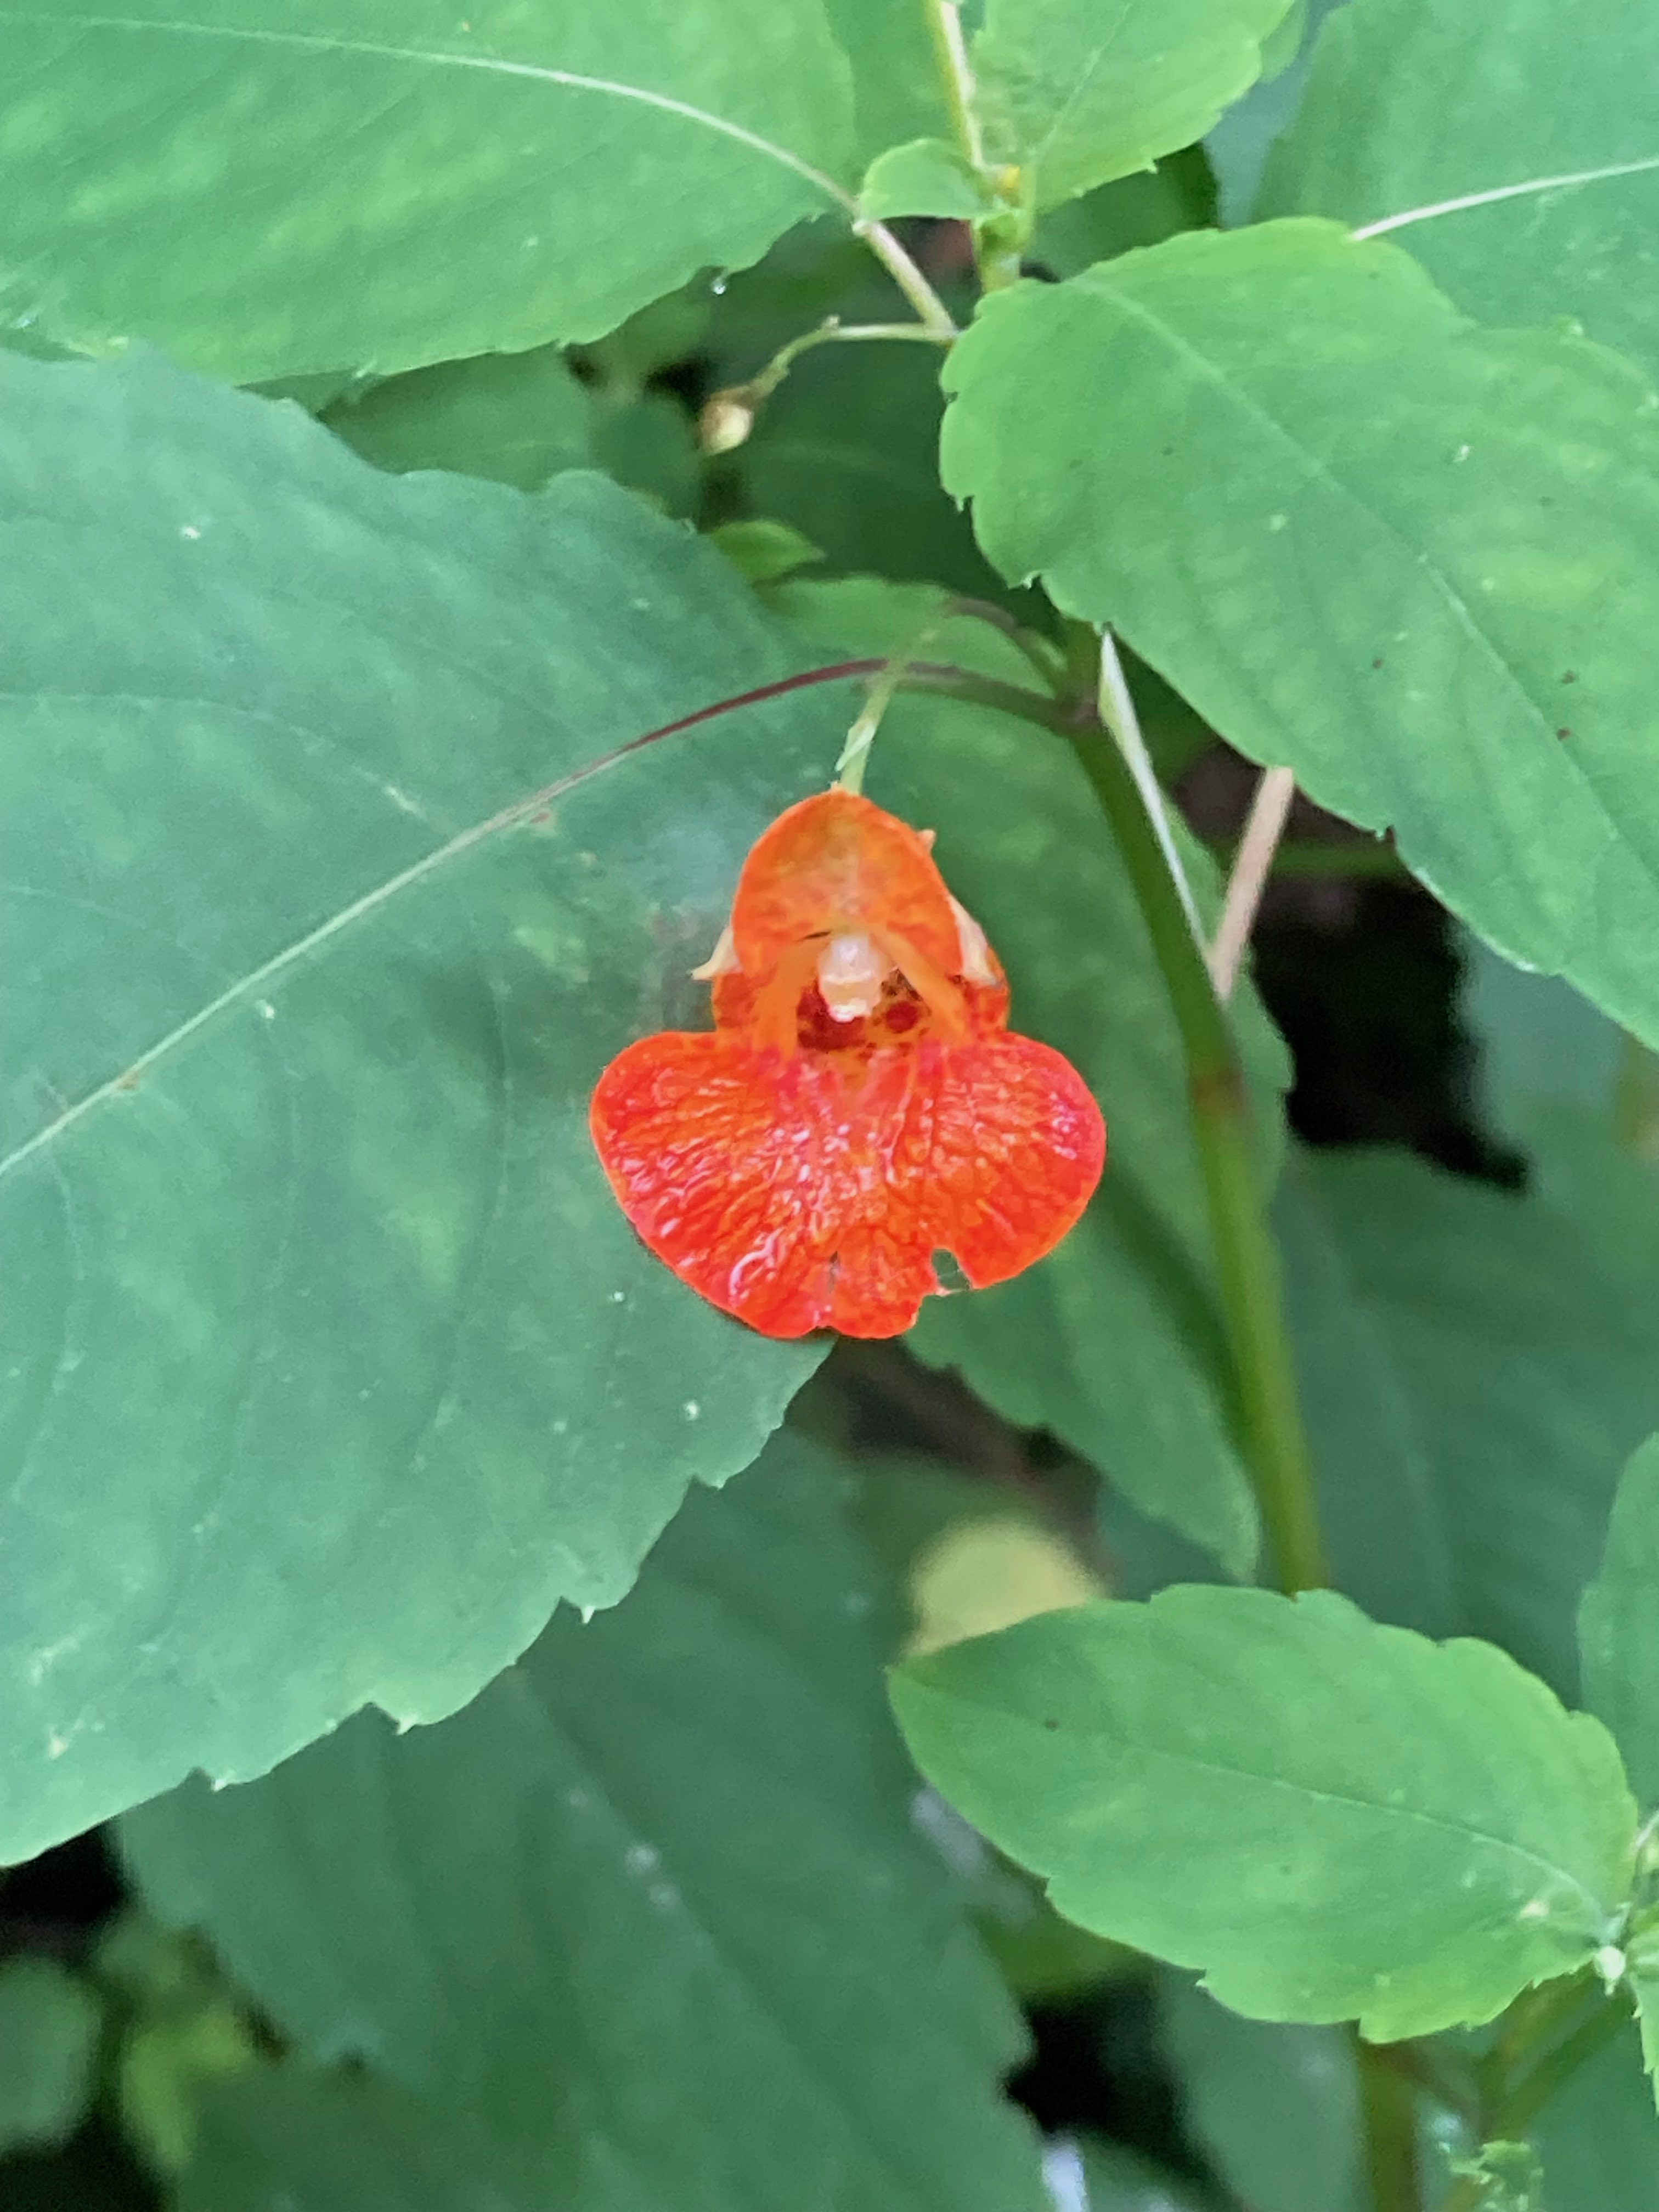 The Scientific Name is Impatiens capensis [=Impatiens biflora]. You will likely hear them called Orange Jewelweed, Orange Touch-me-not, Spotted Touch-me-not. This picture shows the The flowers have three sepals with the lower one extended backward as a spur and five petals of unequal size. The flowers grow in small axillary clusters each dangling on its own slender pedicel.  of Impatiens capensis [=Impatiens biflora]